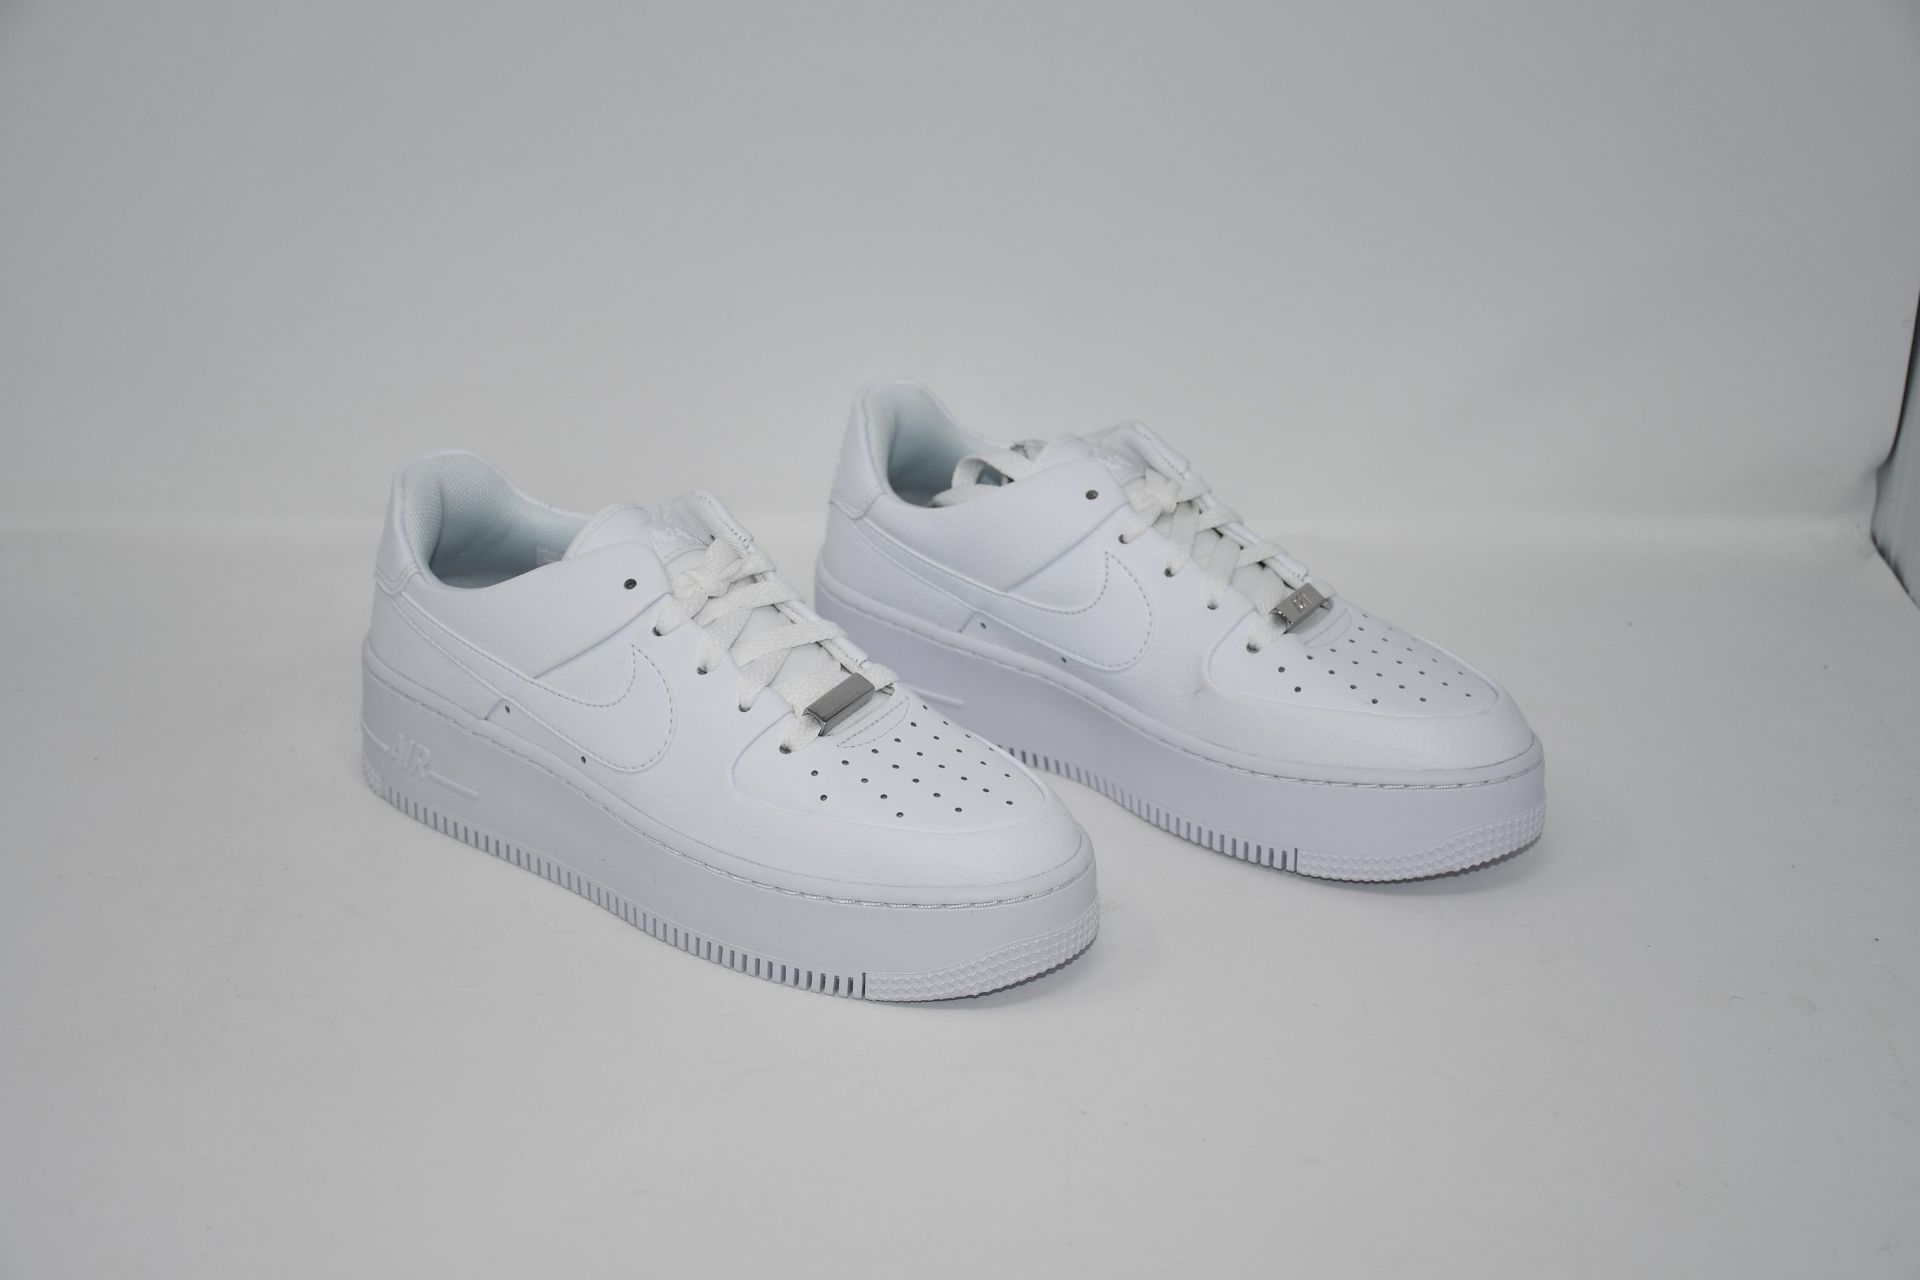 One as new Nike Air Force 1 Sage Low size UK 5.